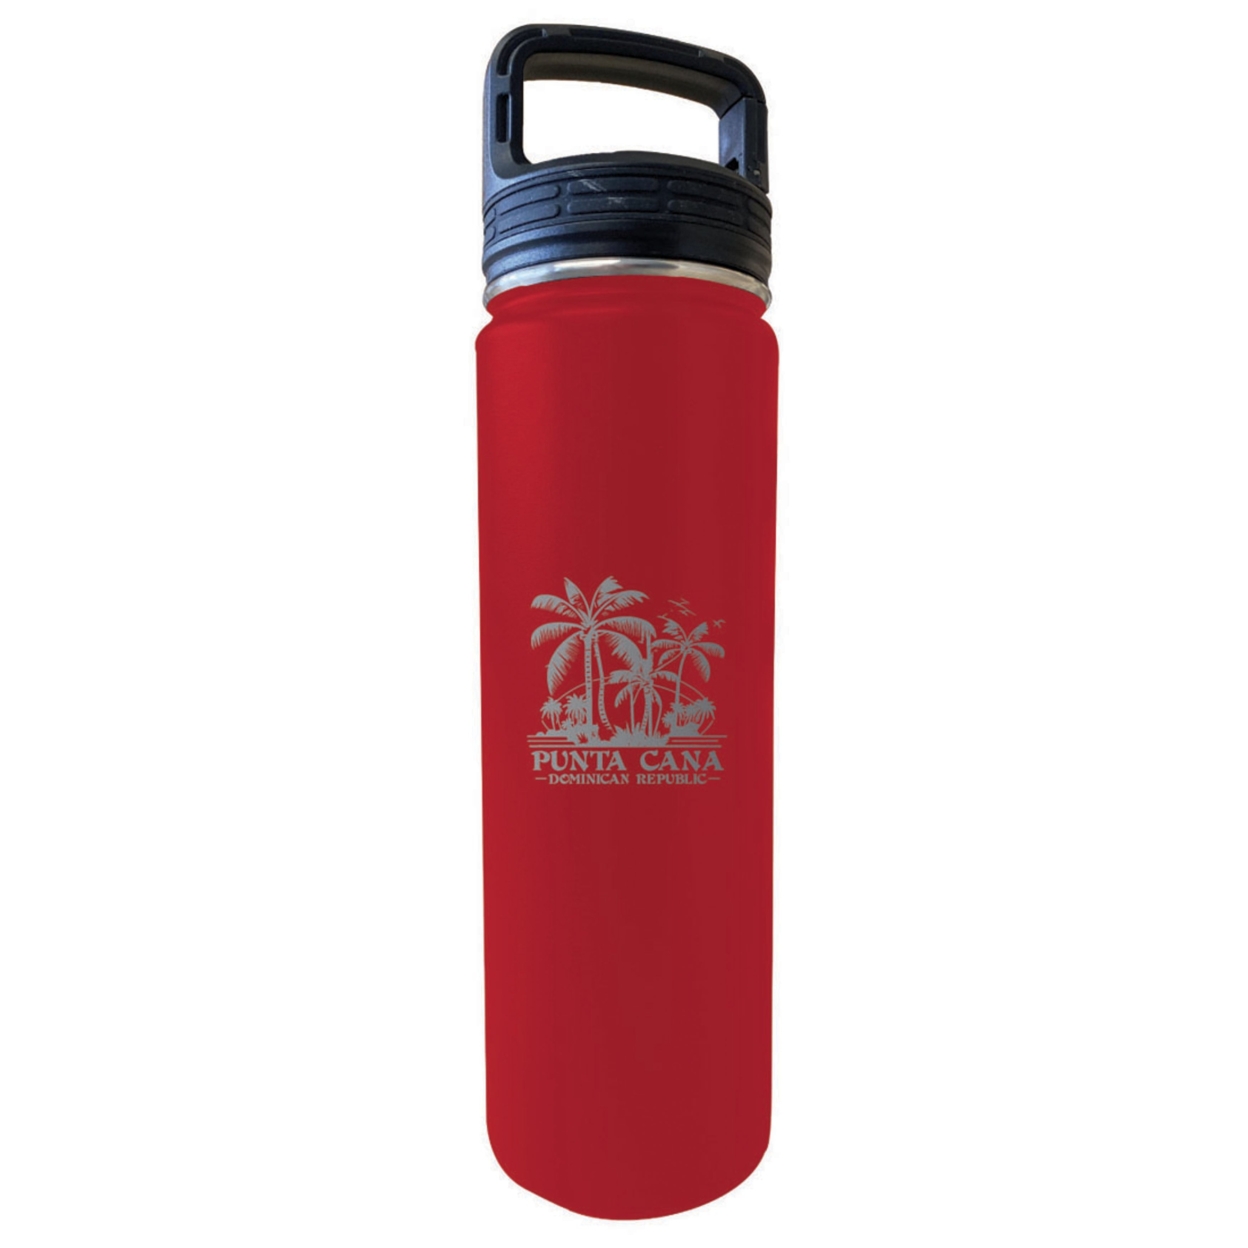 Punta Cana Dominican Republic Souvenir 32 Oz Insulated Stainless Steel Tumbler - Navy, Palm